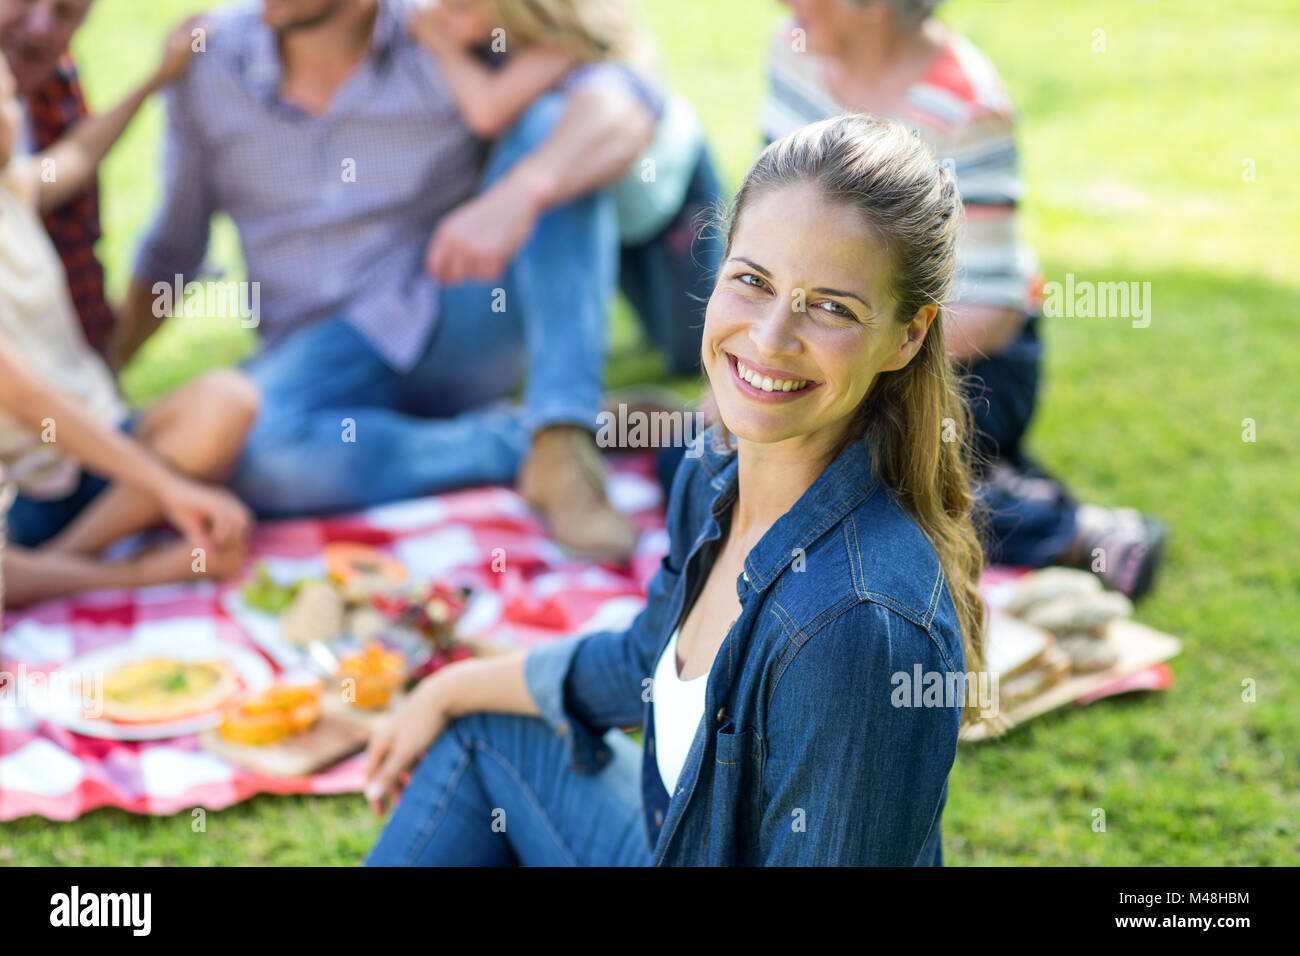 Young woman sitting with family in background at back yard Stock Photo